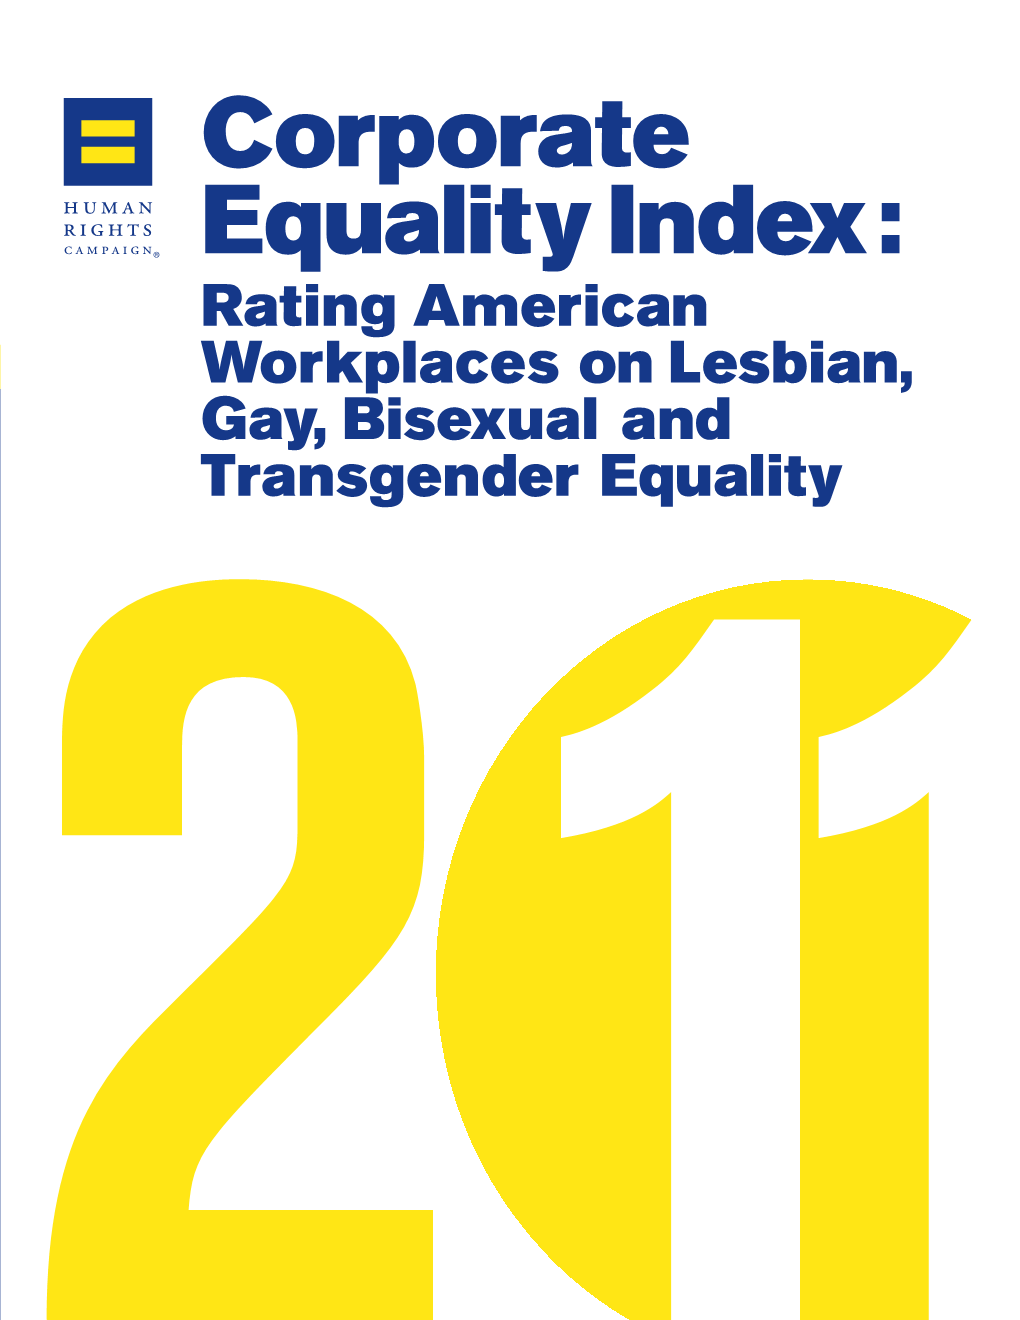 Corporate Equality Index Ratings and Breakdown | 37 Appendix B